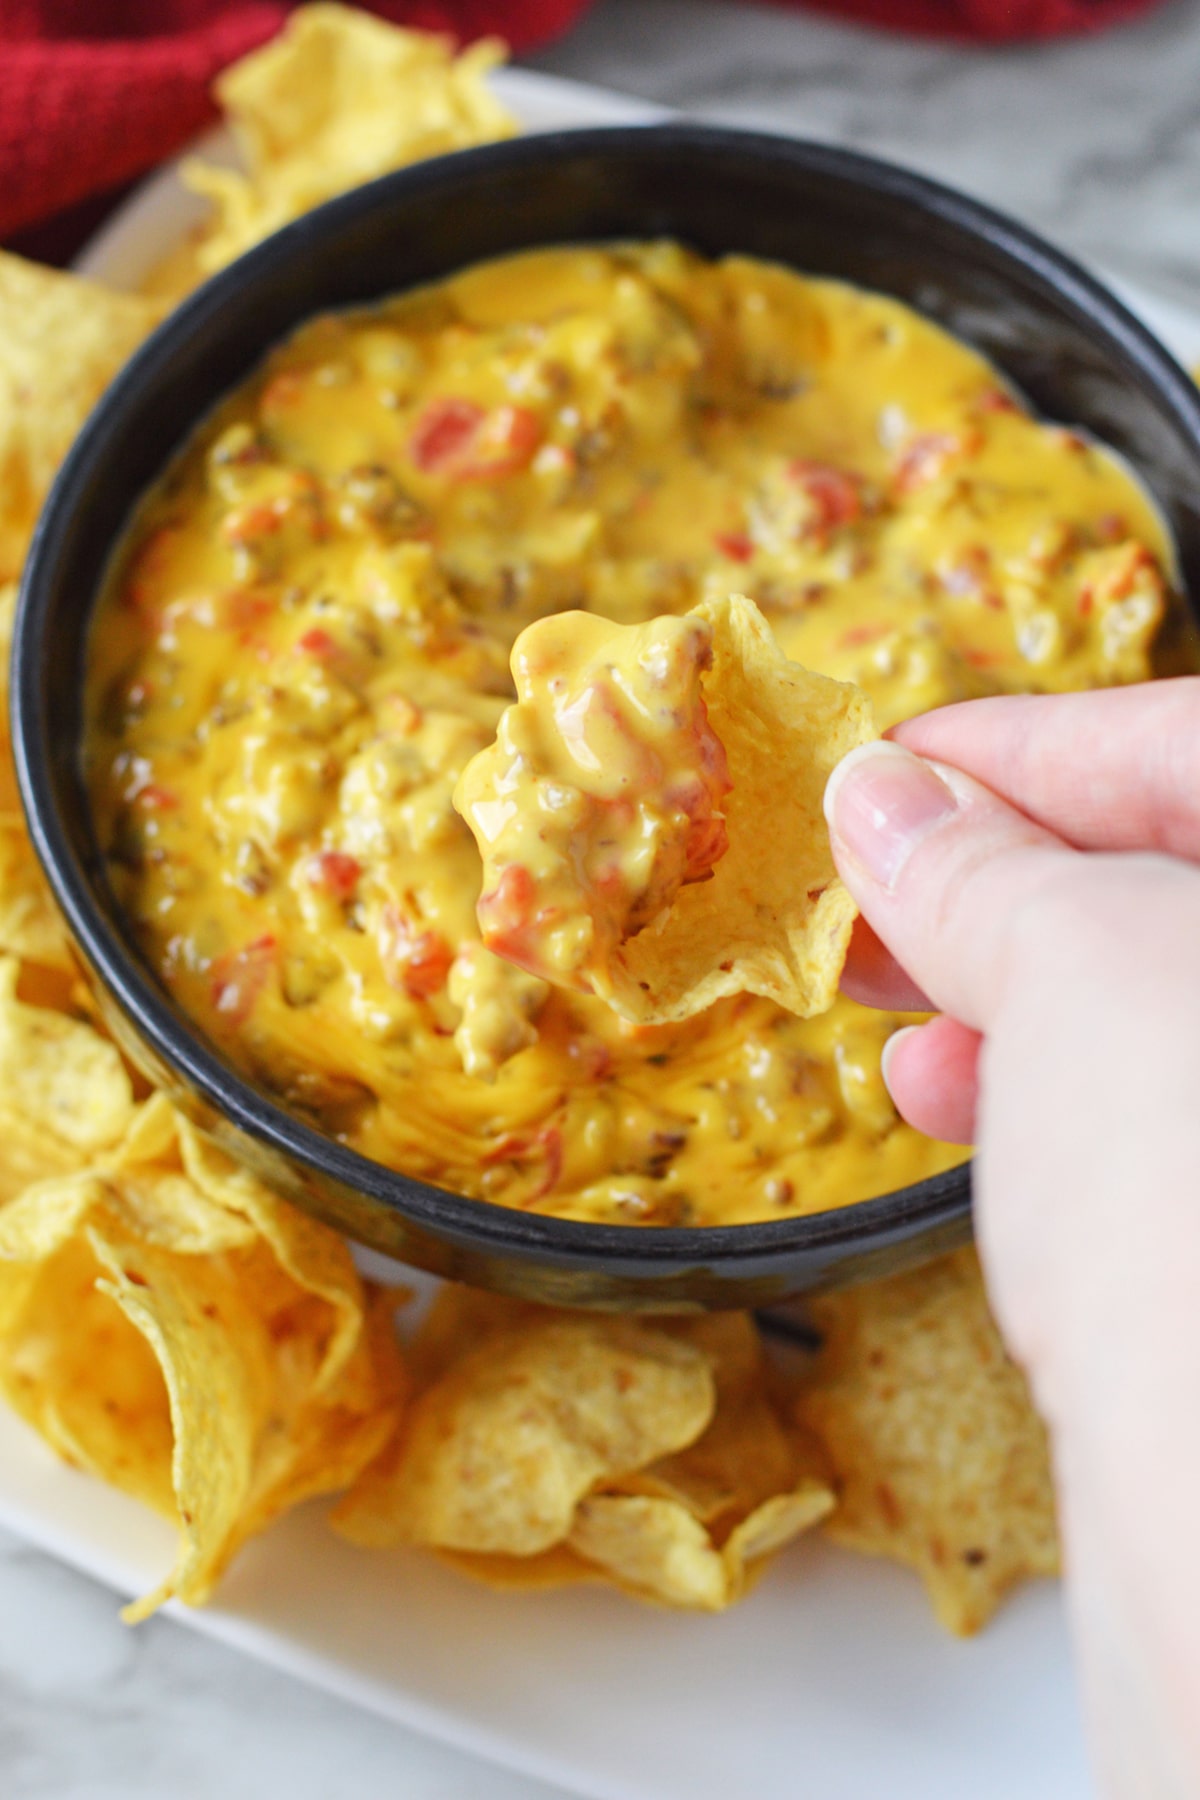 Chips dipped into the Rotel dip with sausage